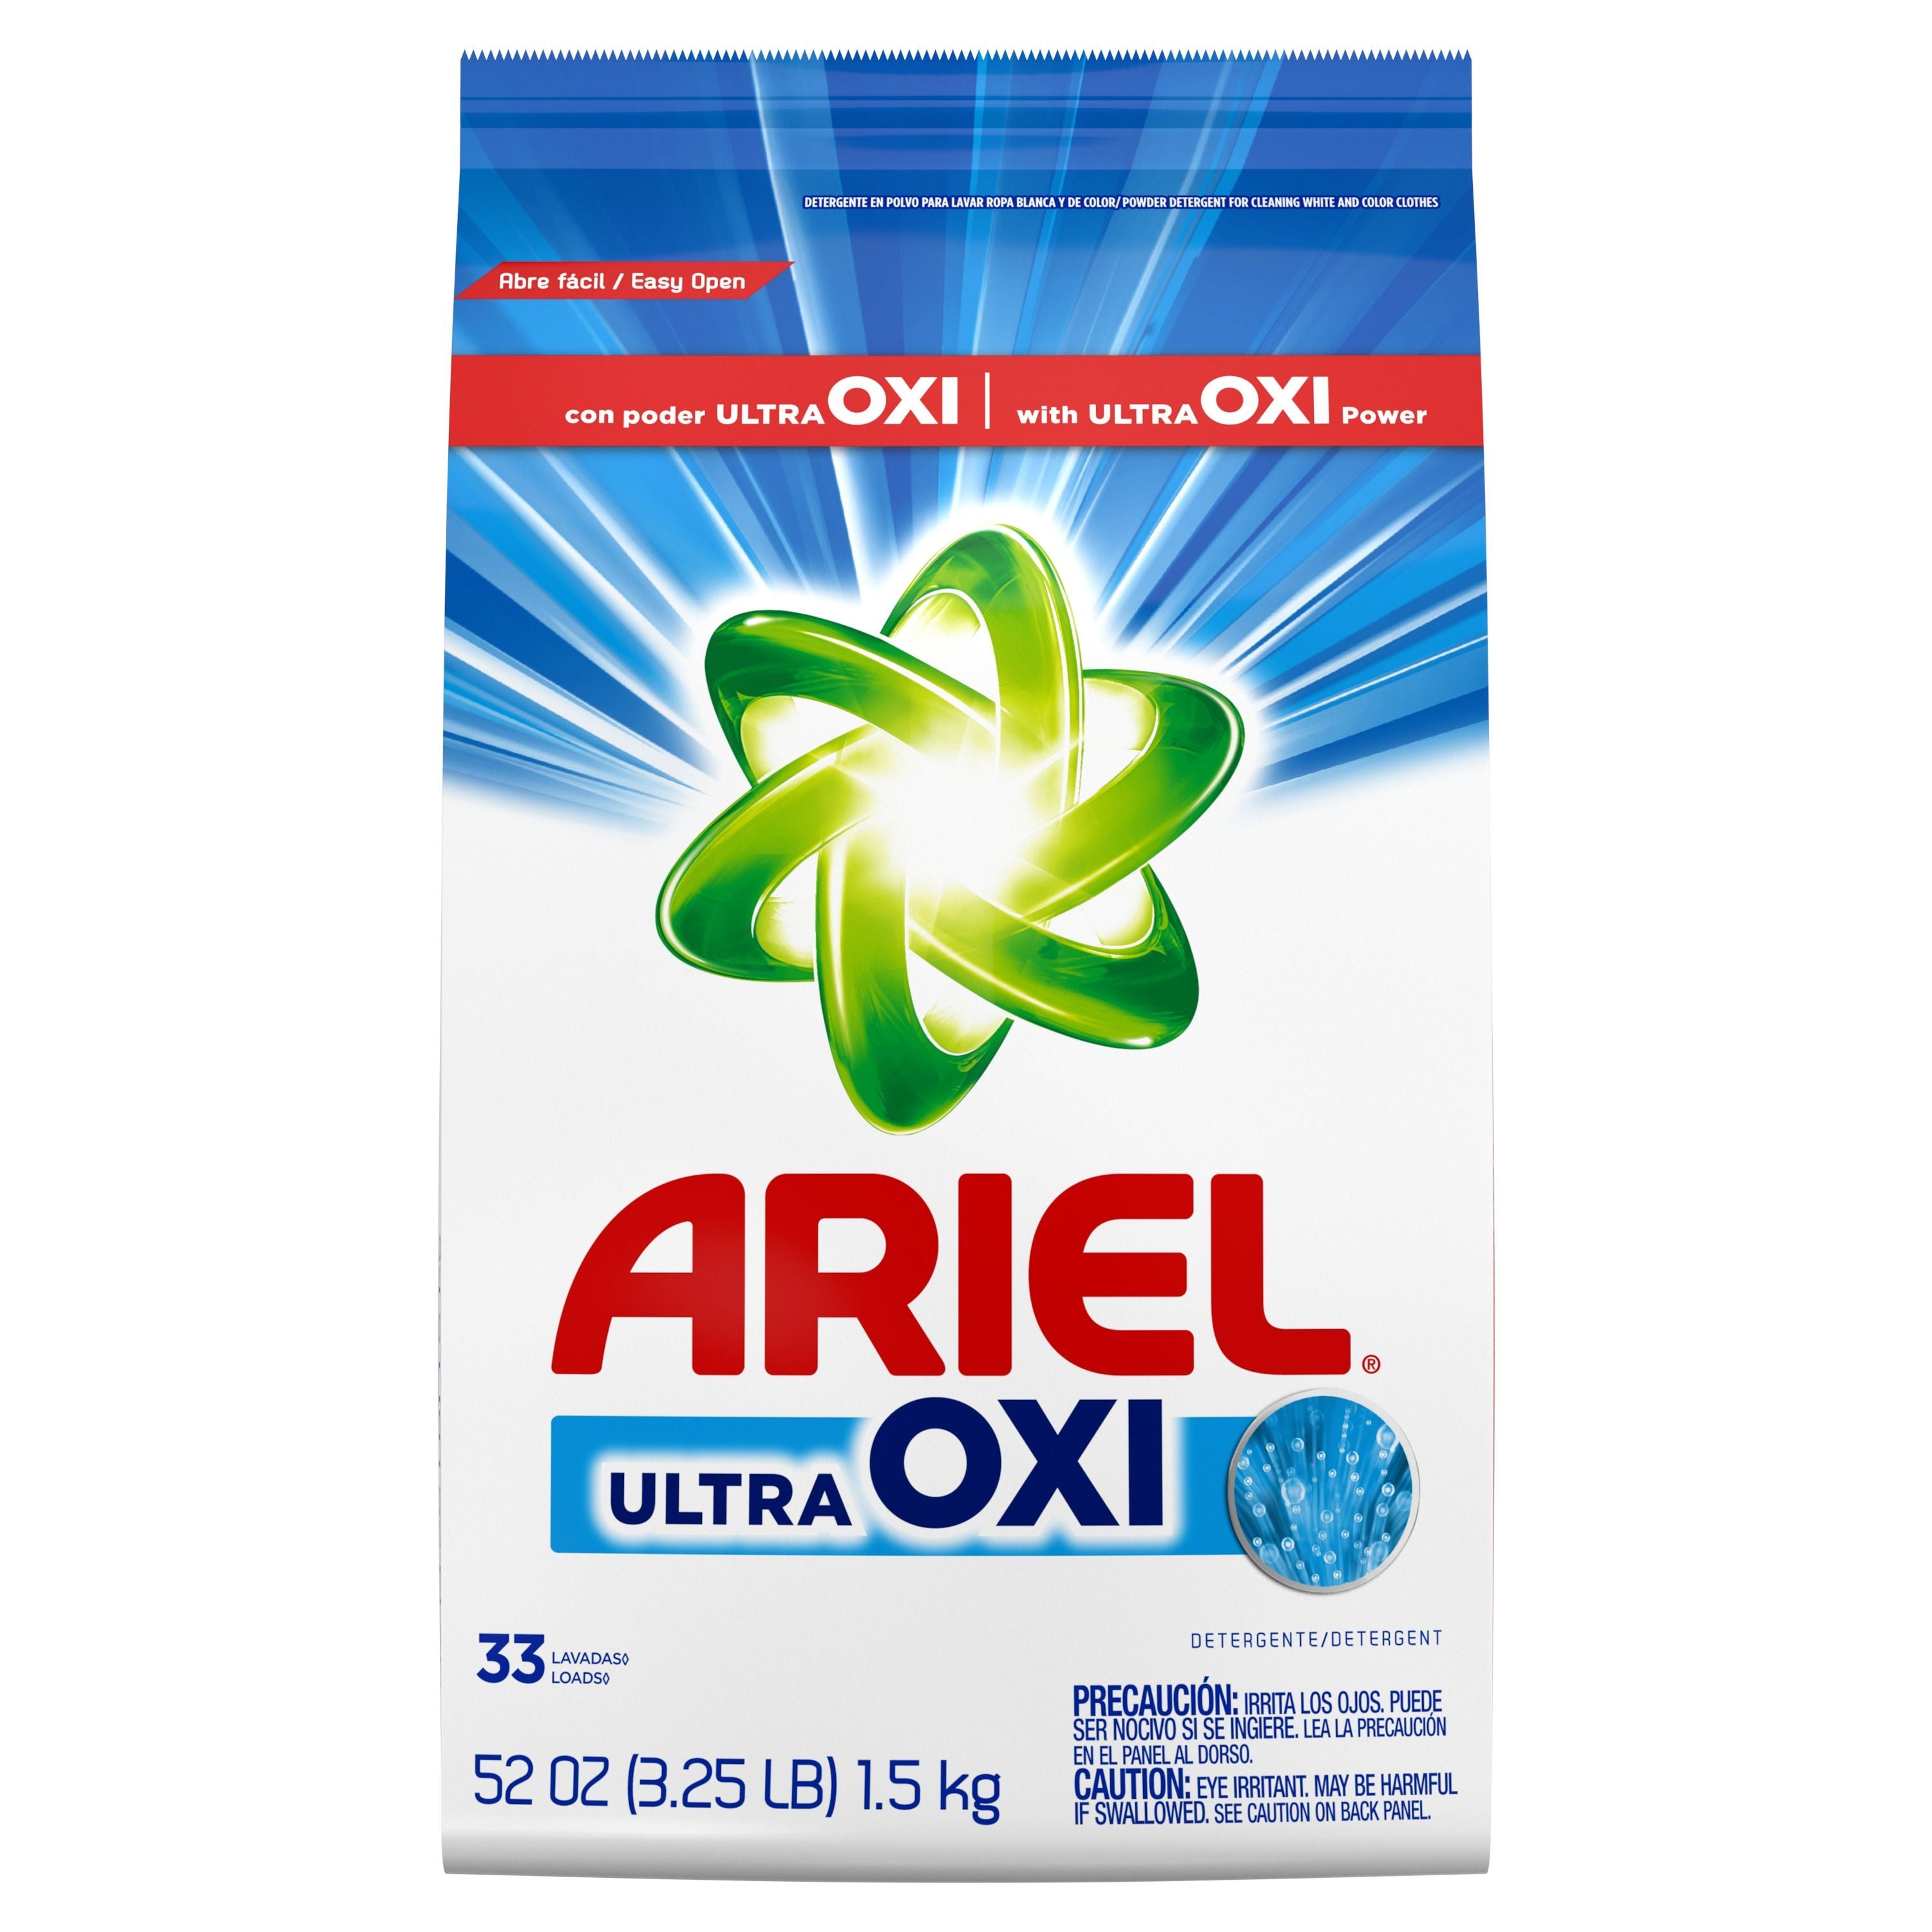 Powder Laundry Detergent with Ultra Oxi, 52oz, 33 loads - Case of 6